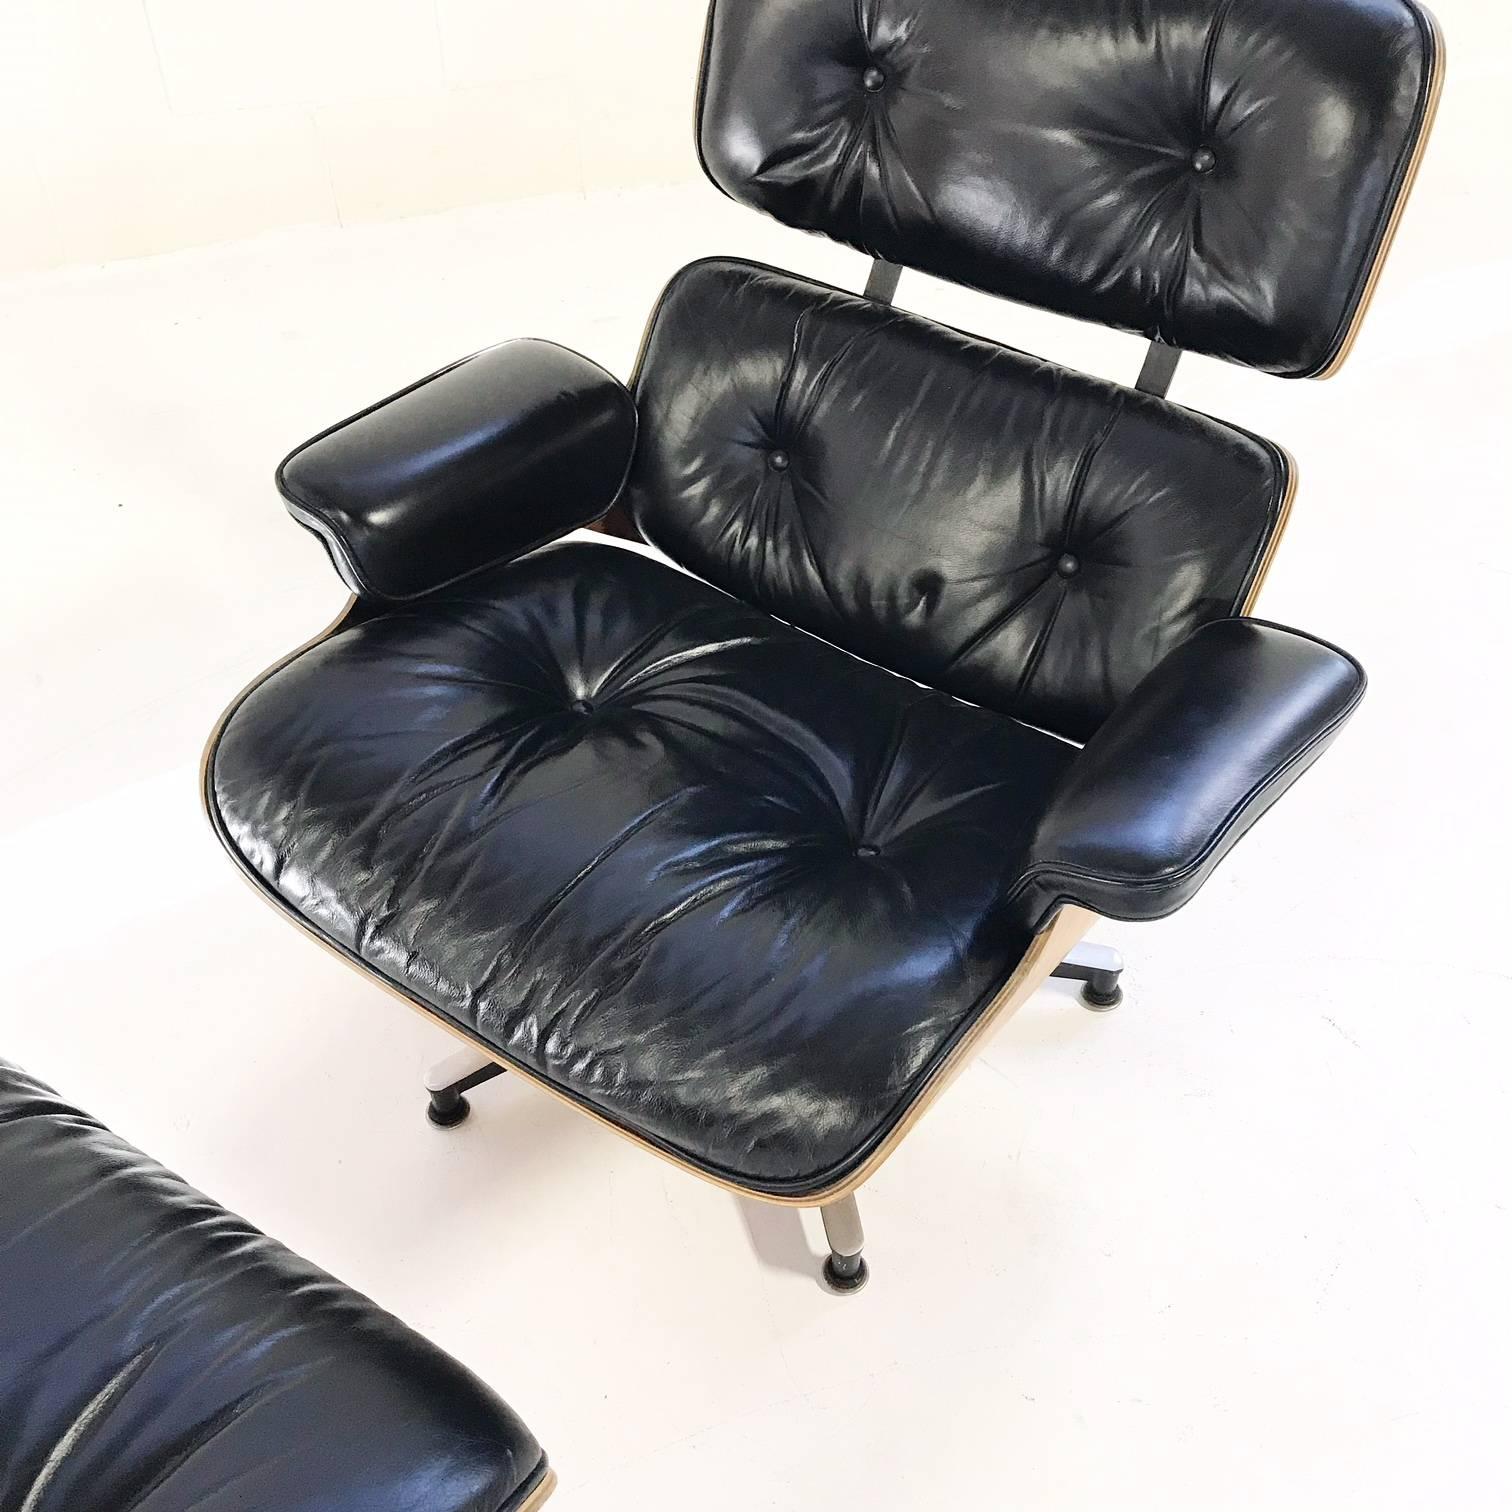 It's always on wish lists. The iconic Eames lounge and ottoman. This one is in excellent condition. The black leather is flawless, the walnut is lovely, and the enameled metal shows no signs of wear. Manufacturer's label is underneath. 

Charles